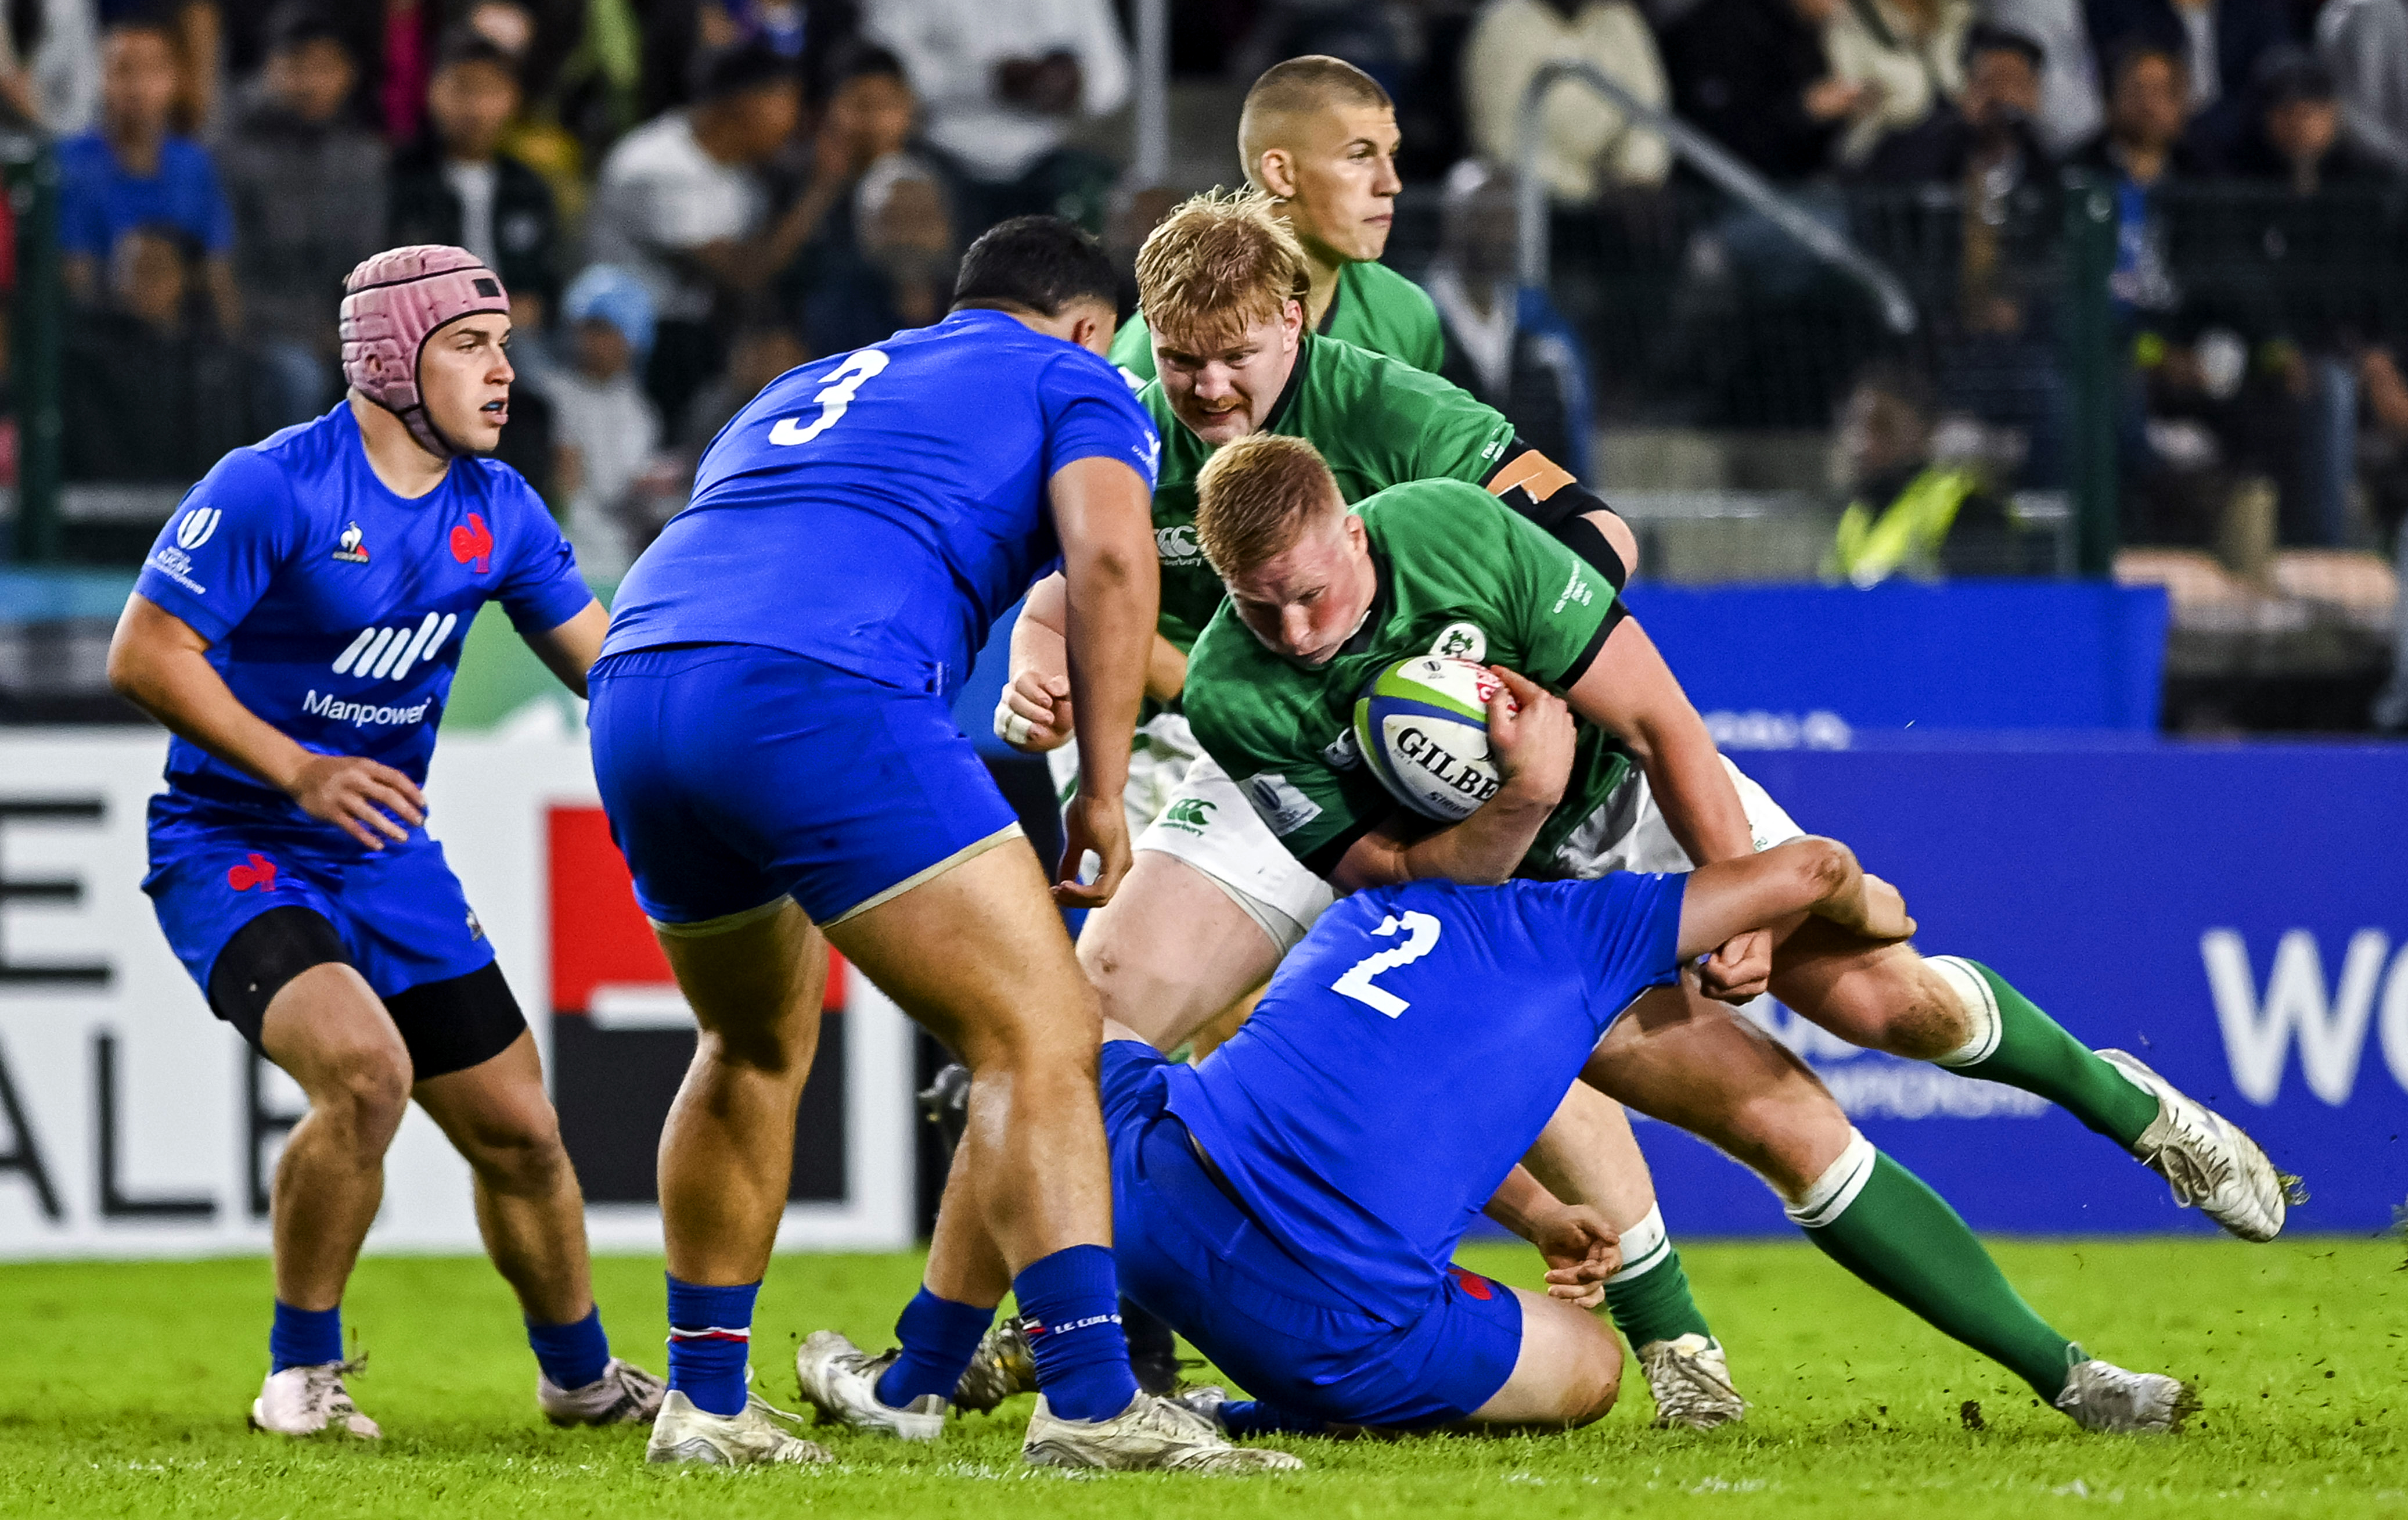 France win a third consecutive World Under-20 title as they beat Ireland on Bastille Day